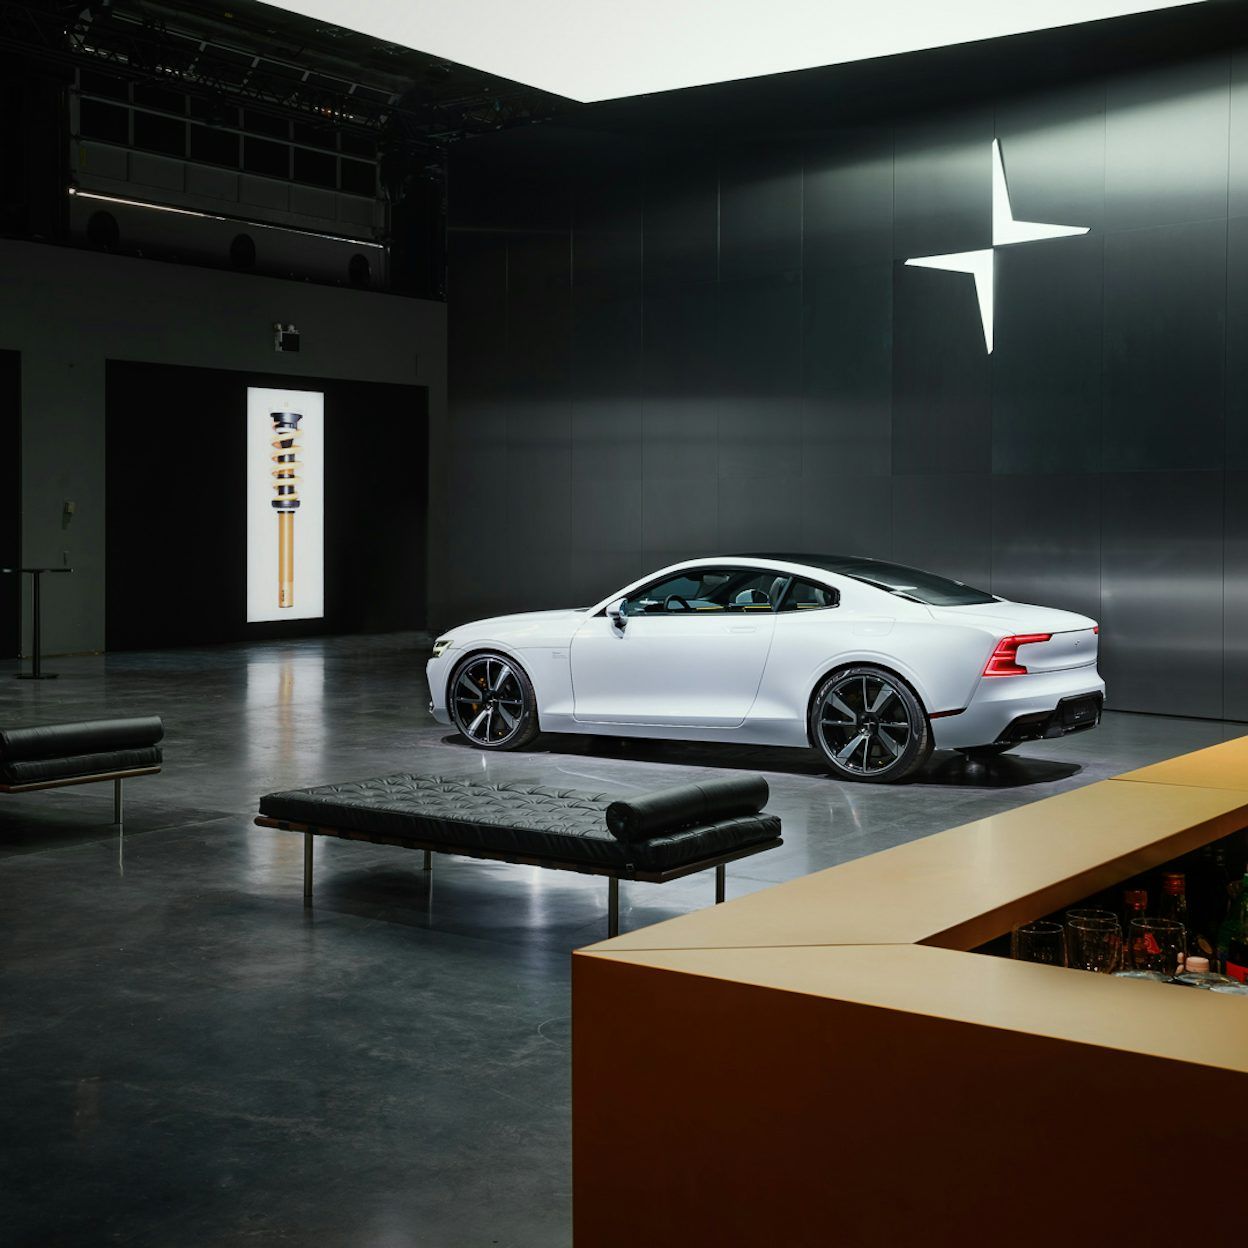 A Polestar parked in front of a black wall with the Polestar logo